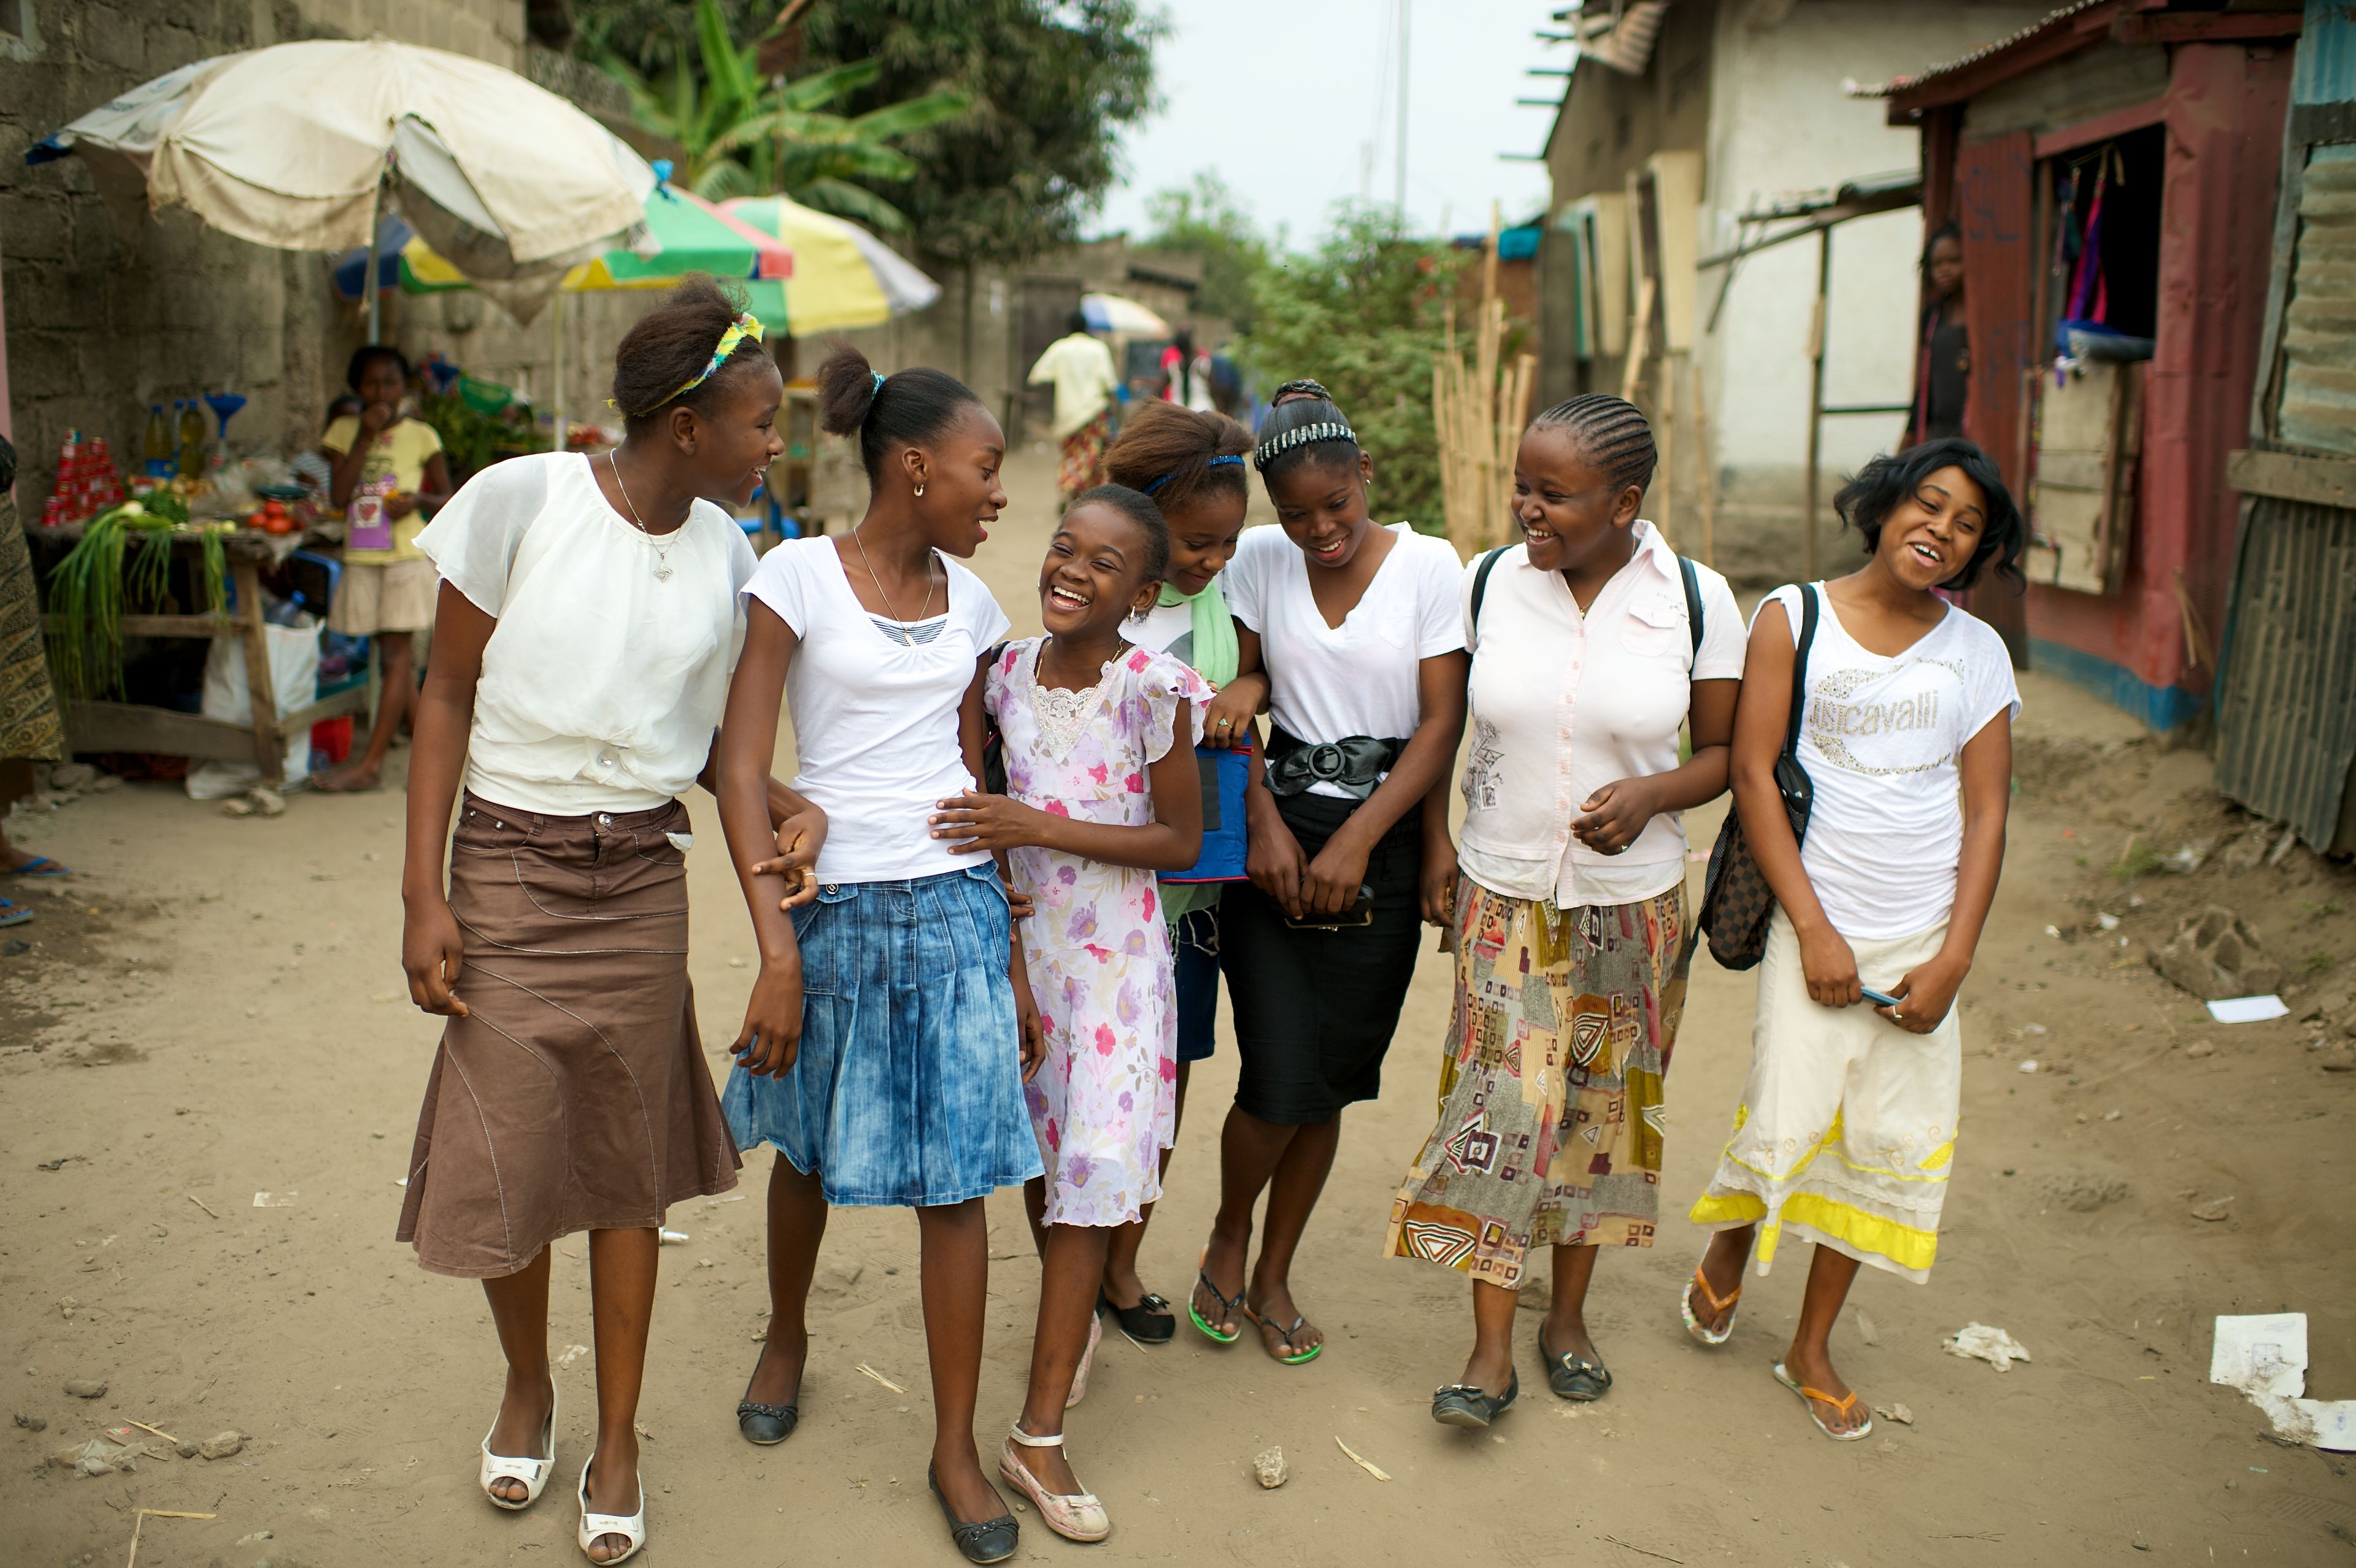 A group of young women walking in a row down a street in Africa.